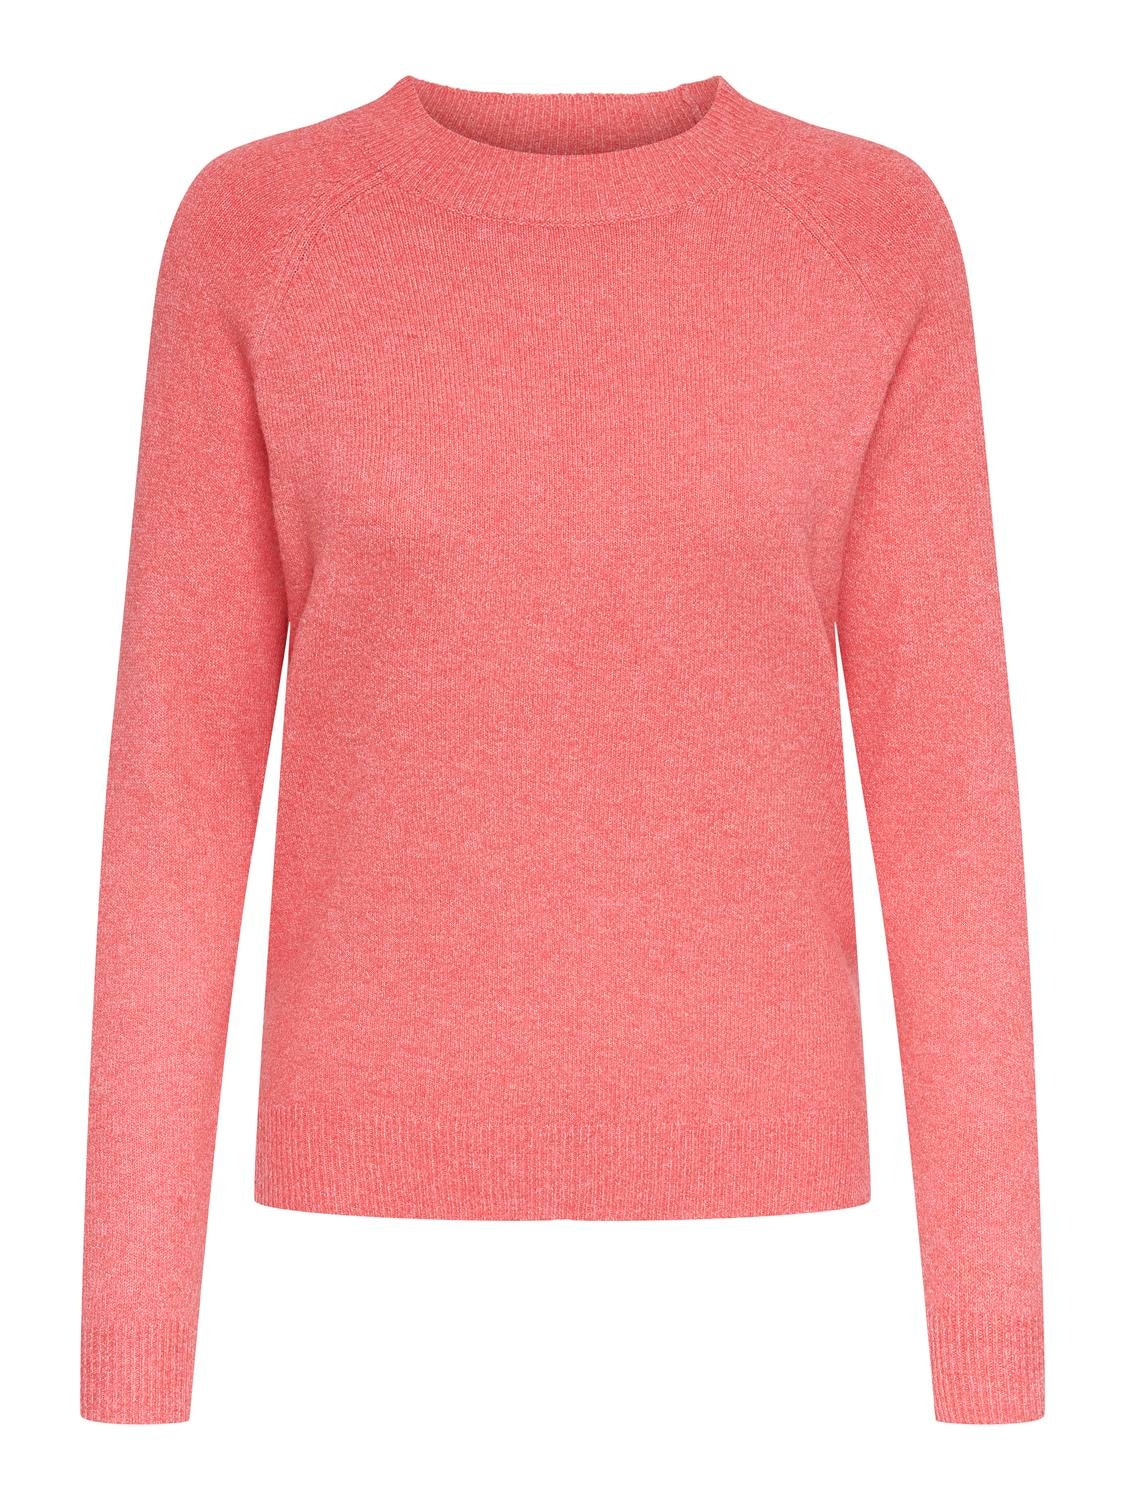 ONLY Round Neck Ribbed cuffs Pullover -Sun Kissed Coral - 15204279